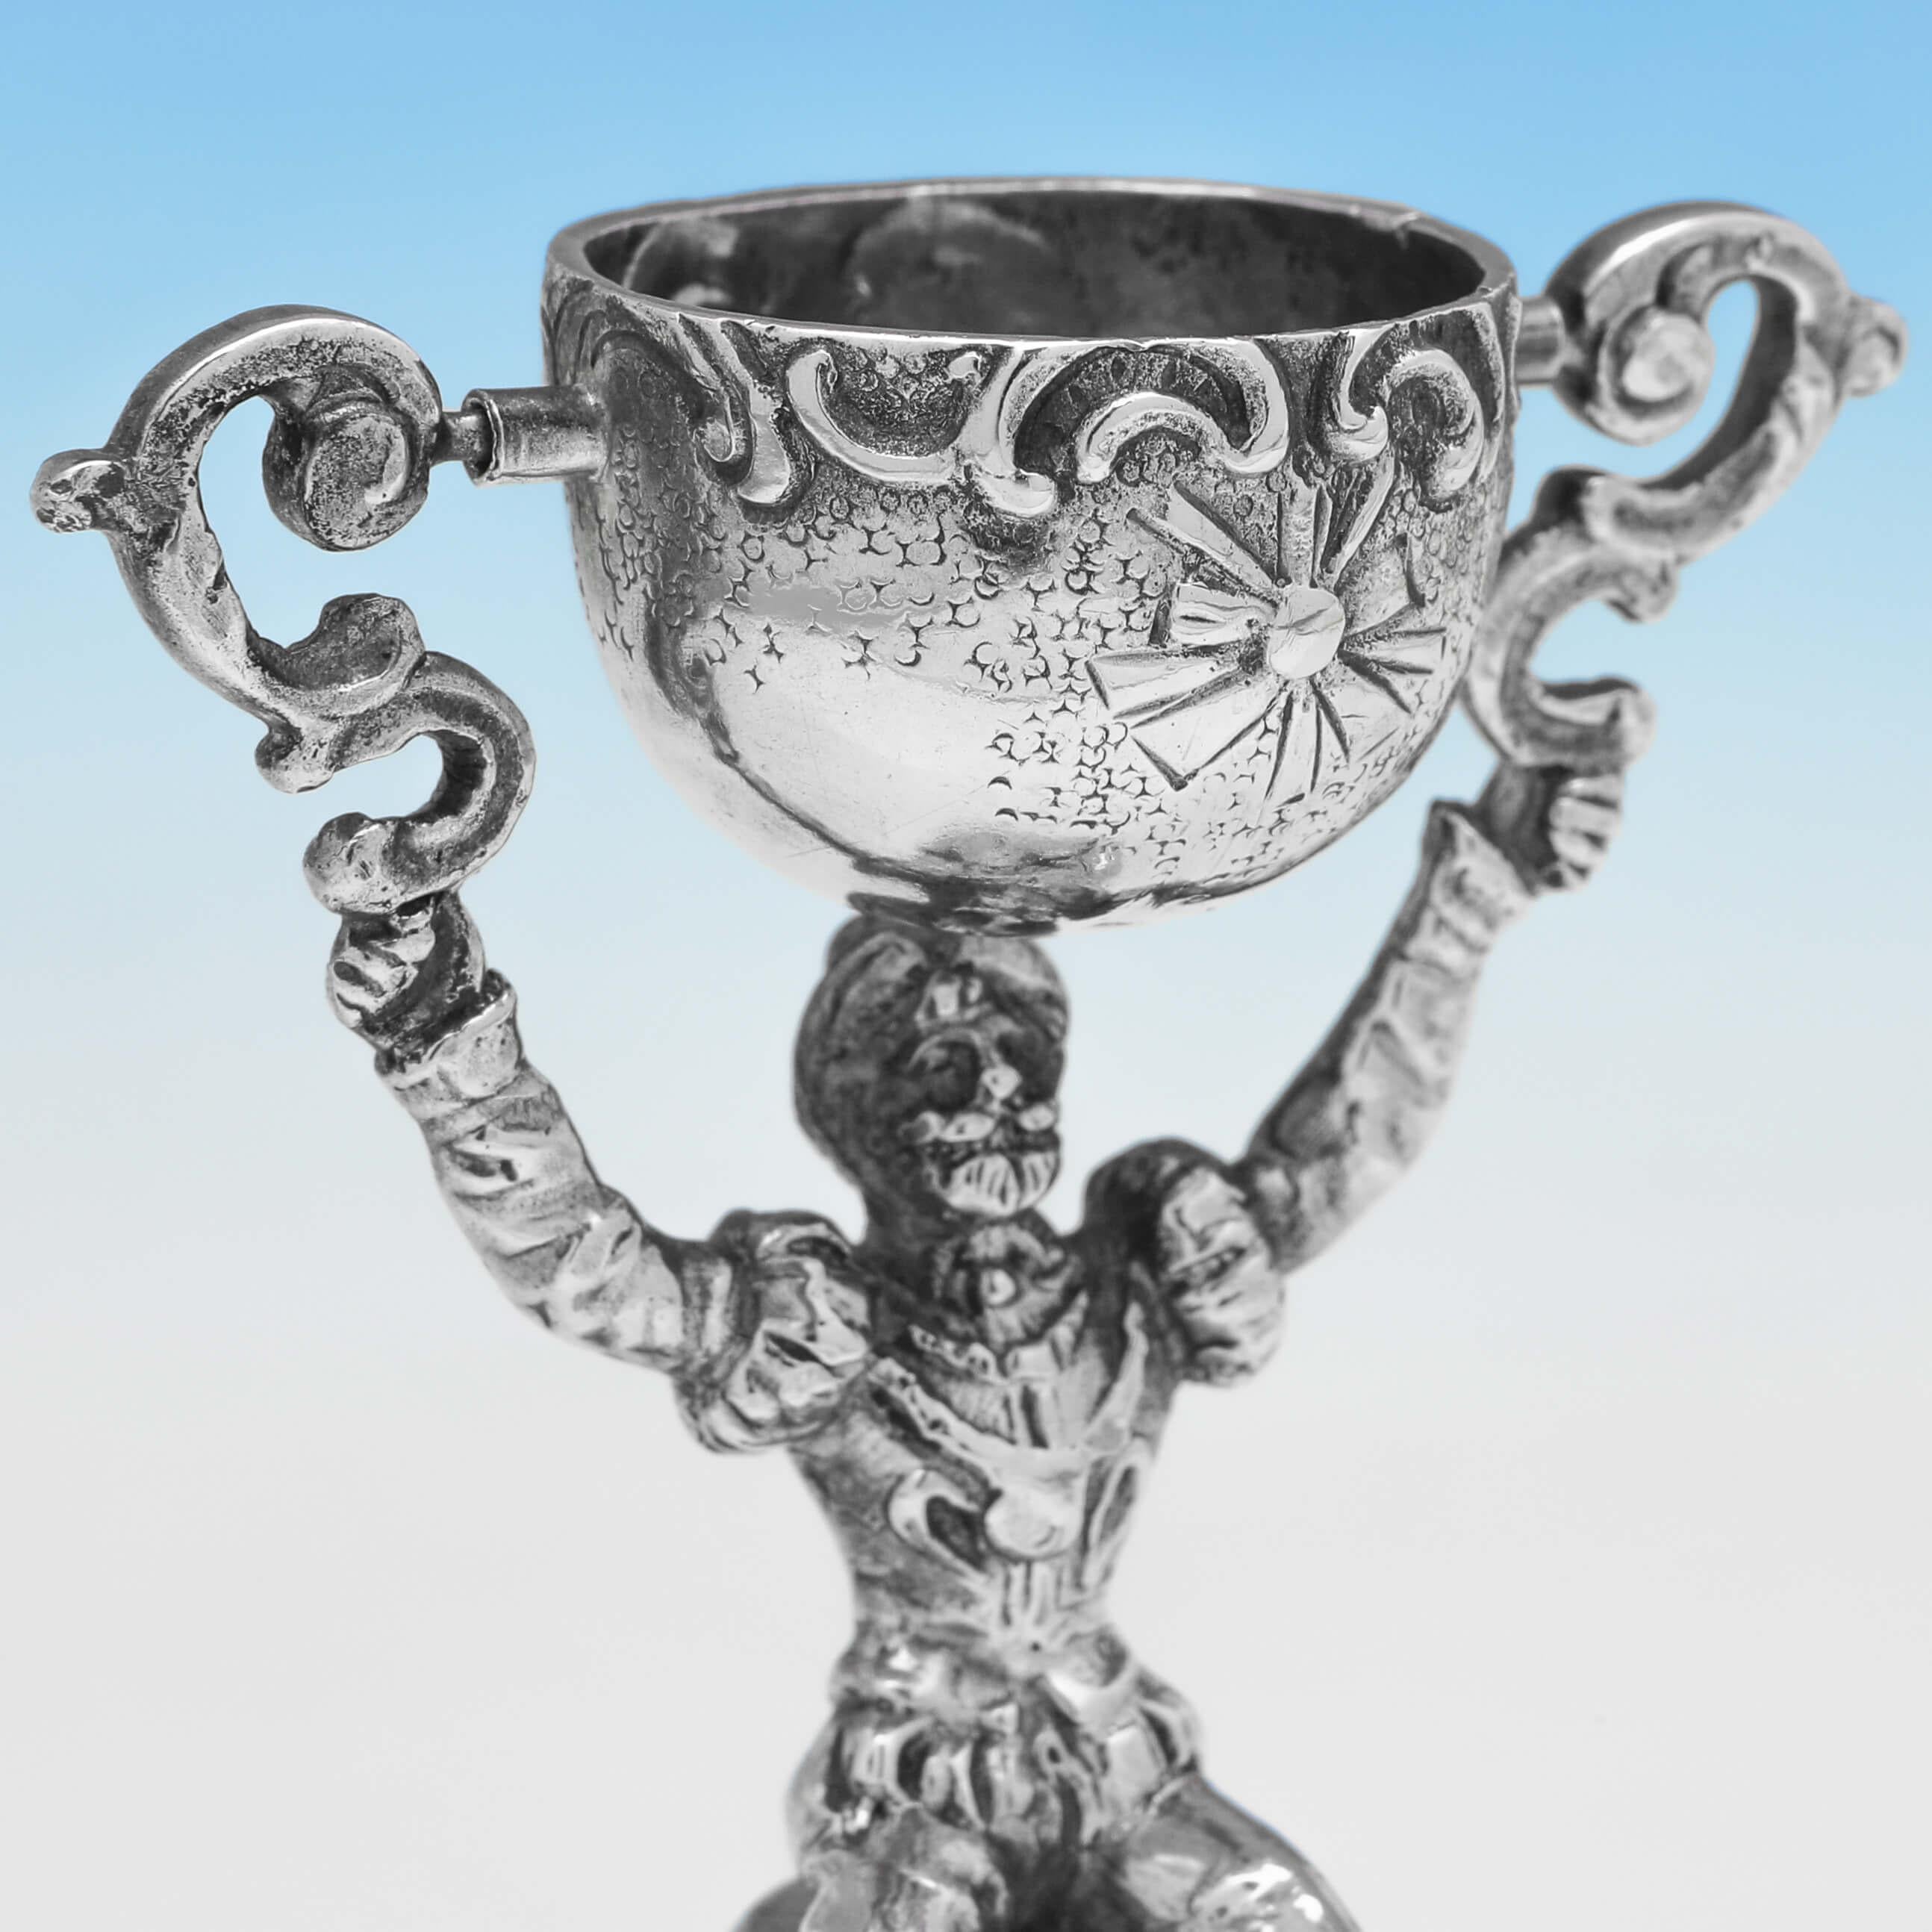 English Sterling Silver Wager Cup or Marriage Cup, Berthold Muller 1912 Import Marked For Sale